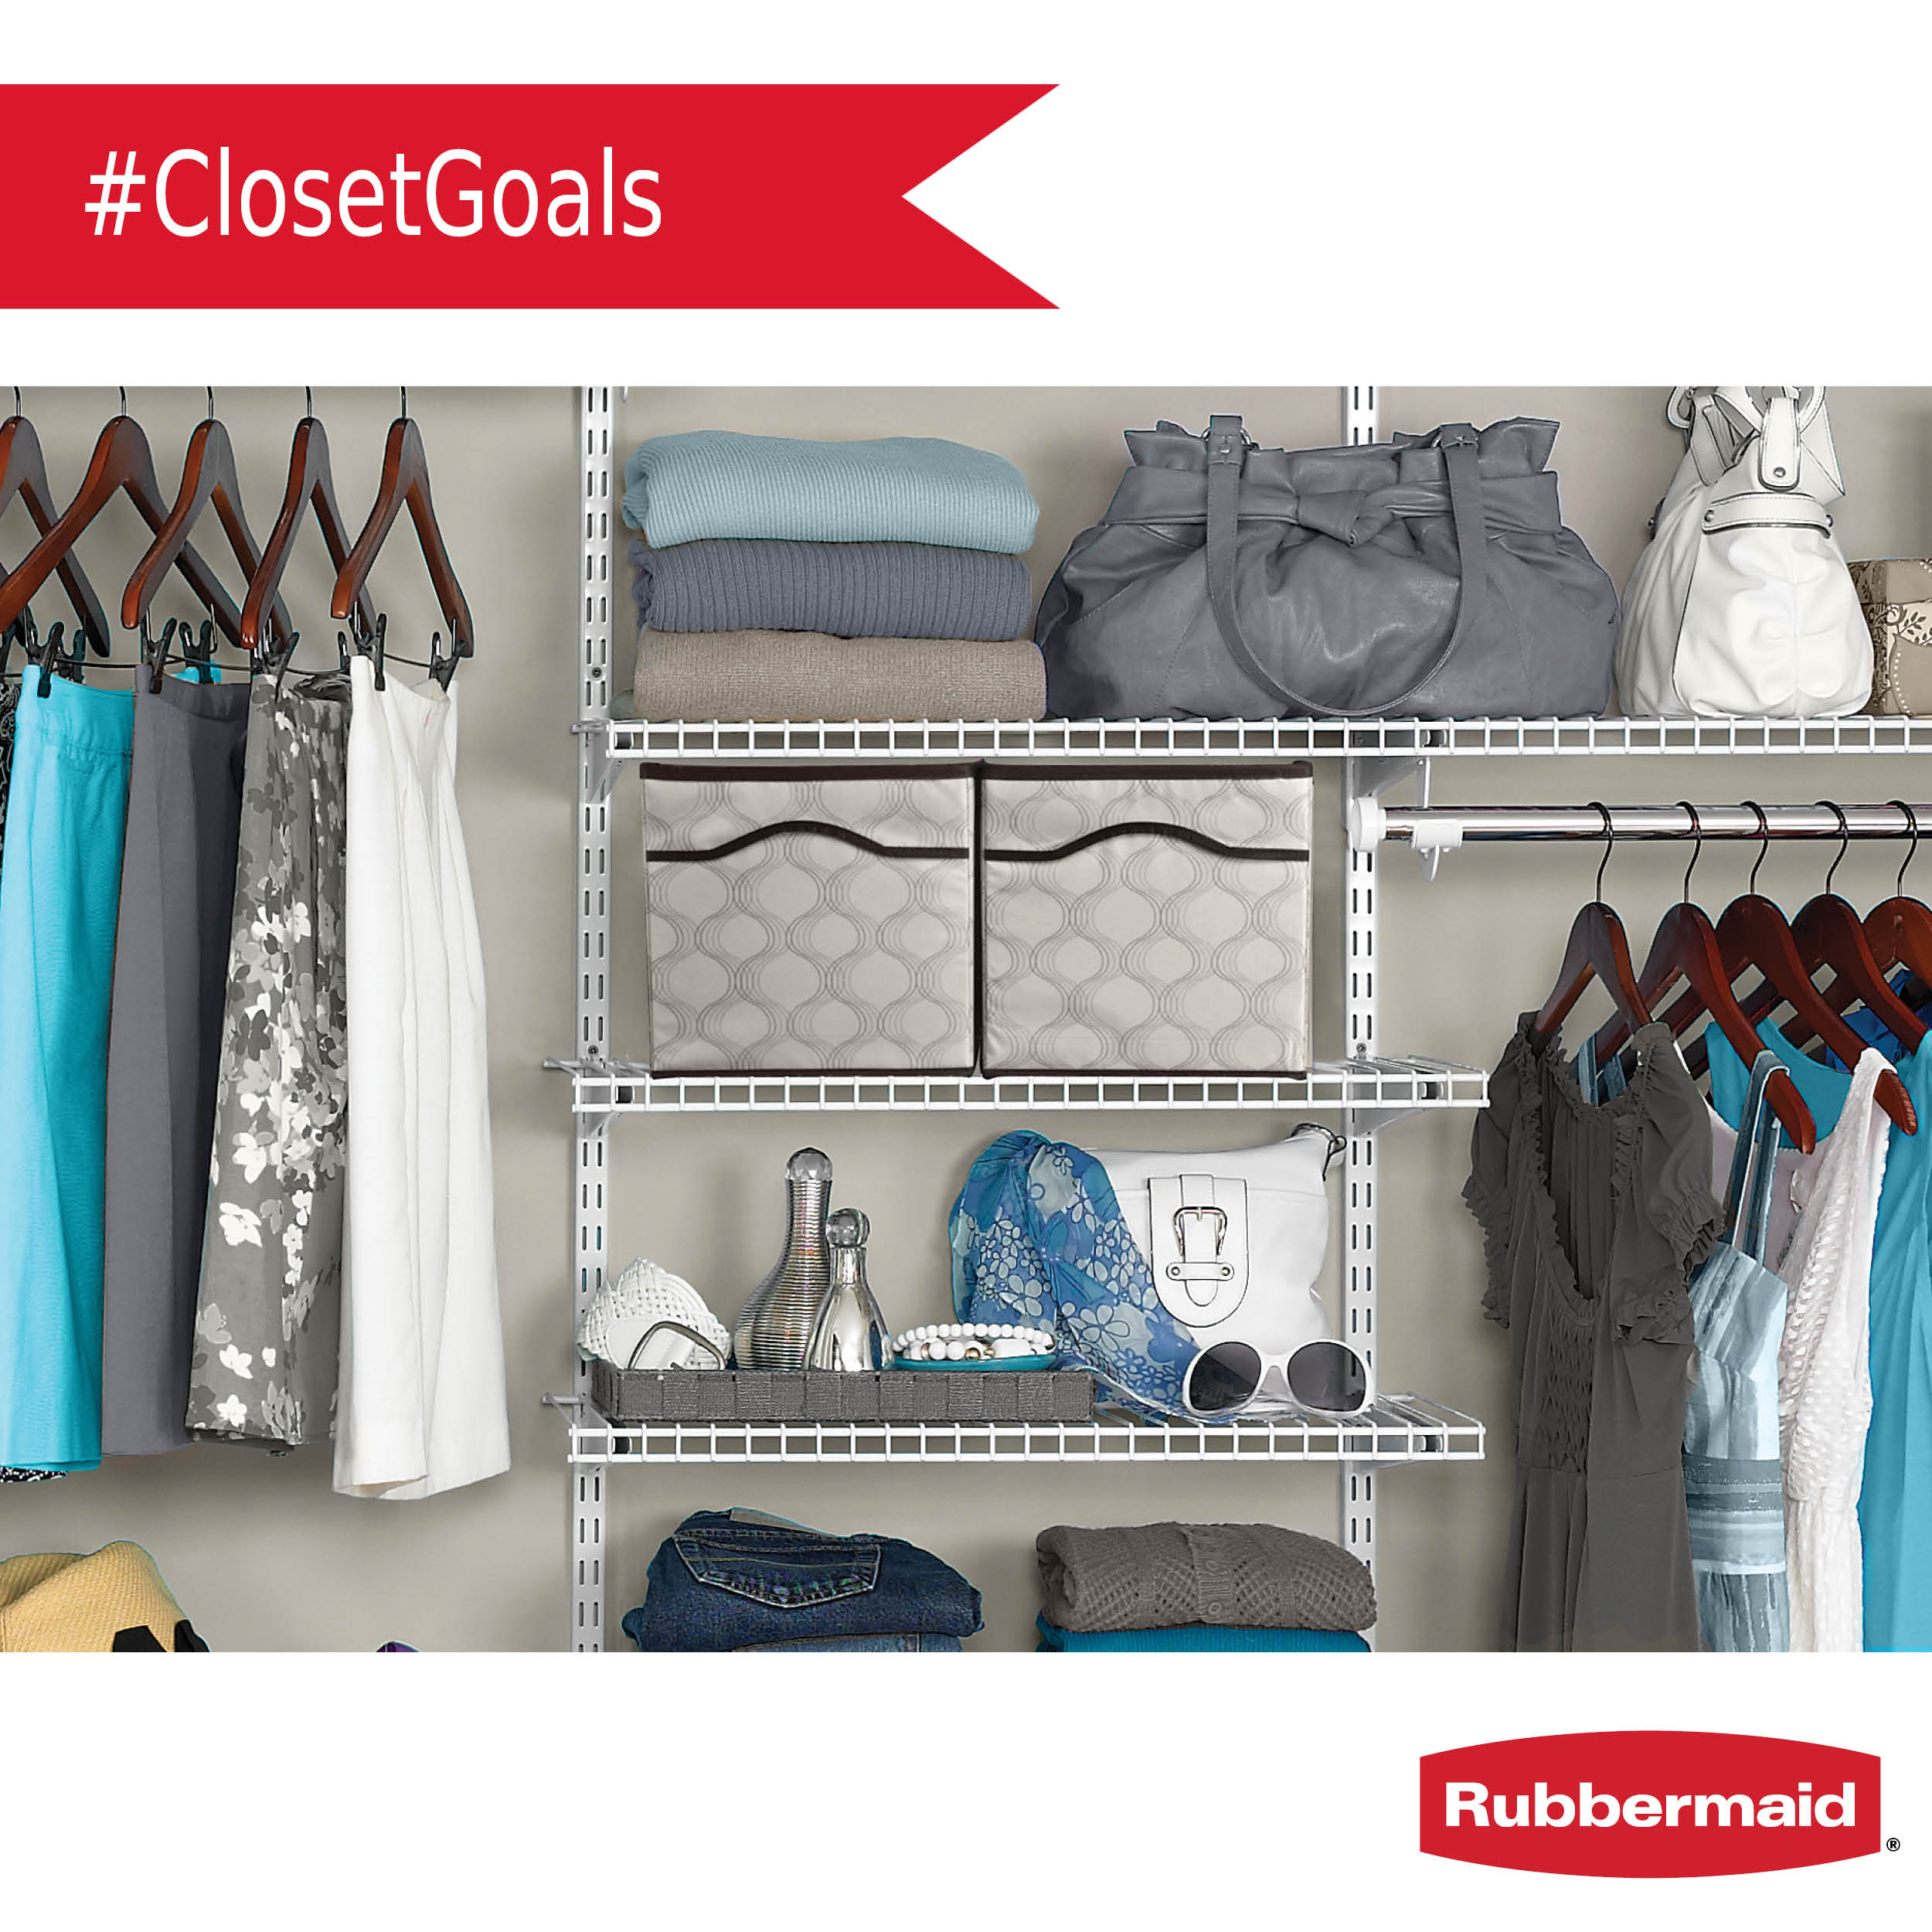 Rubbermaid on X: Your dream closet is in reach thanks to